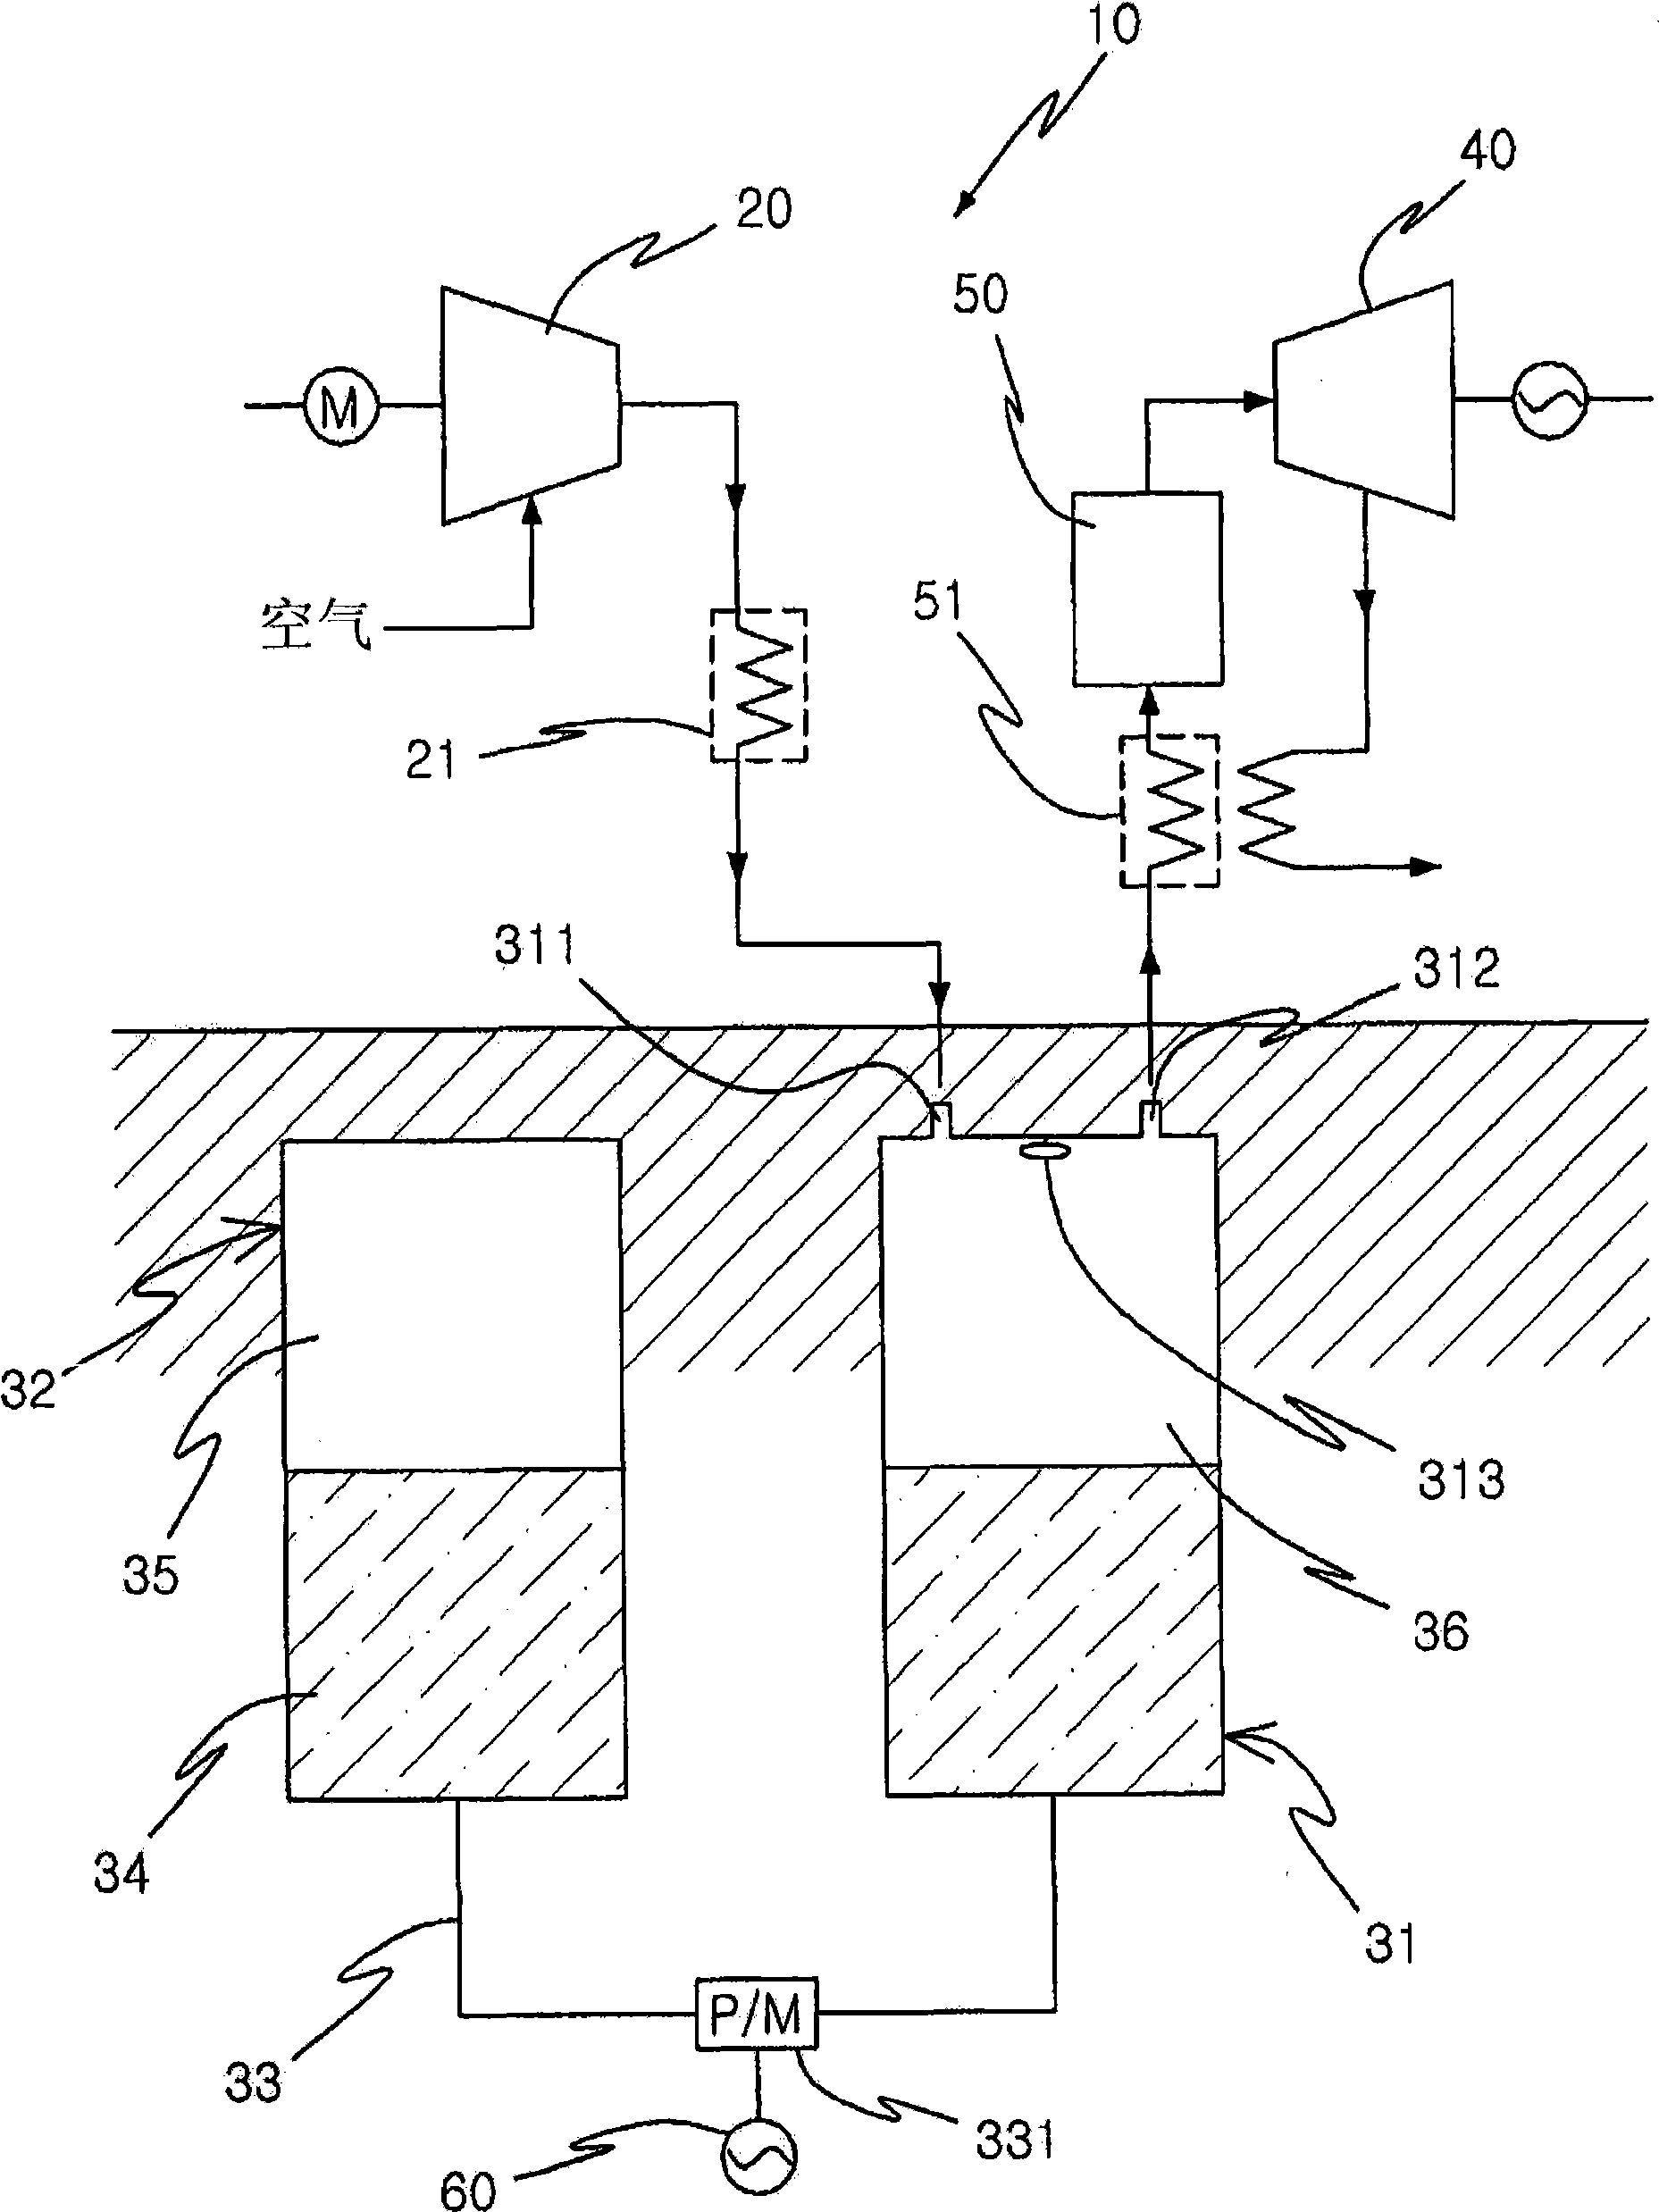 Compressed-air-storing electricity generating system and electricity generating method using the same